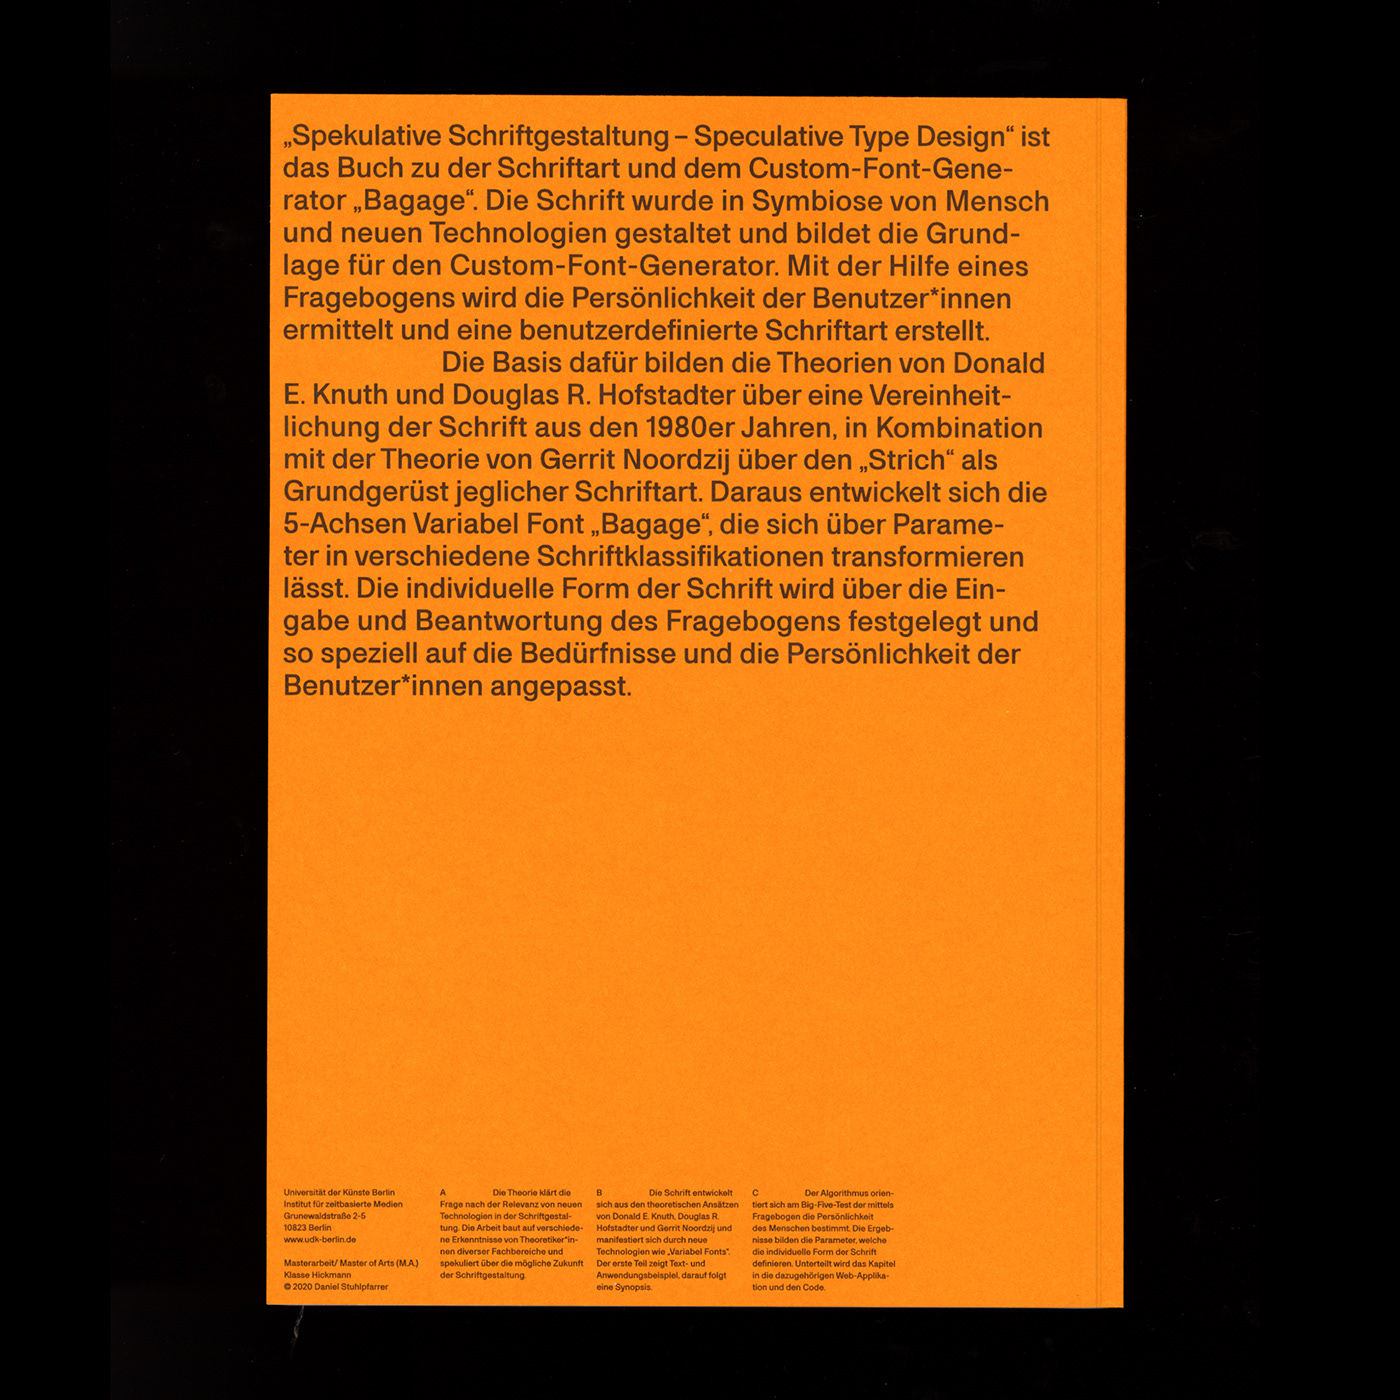 Speculative type design cover back